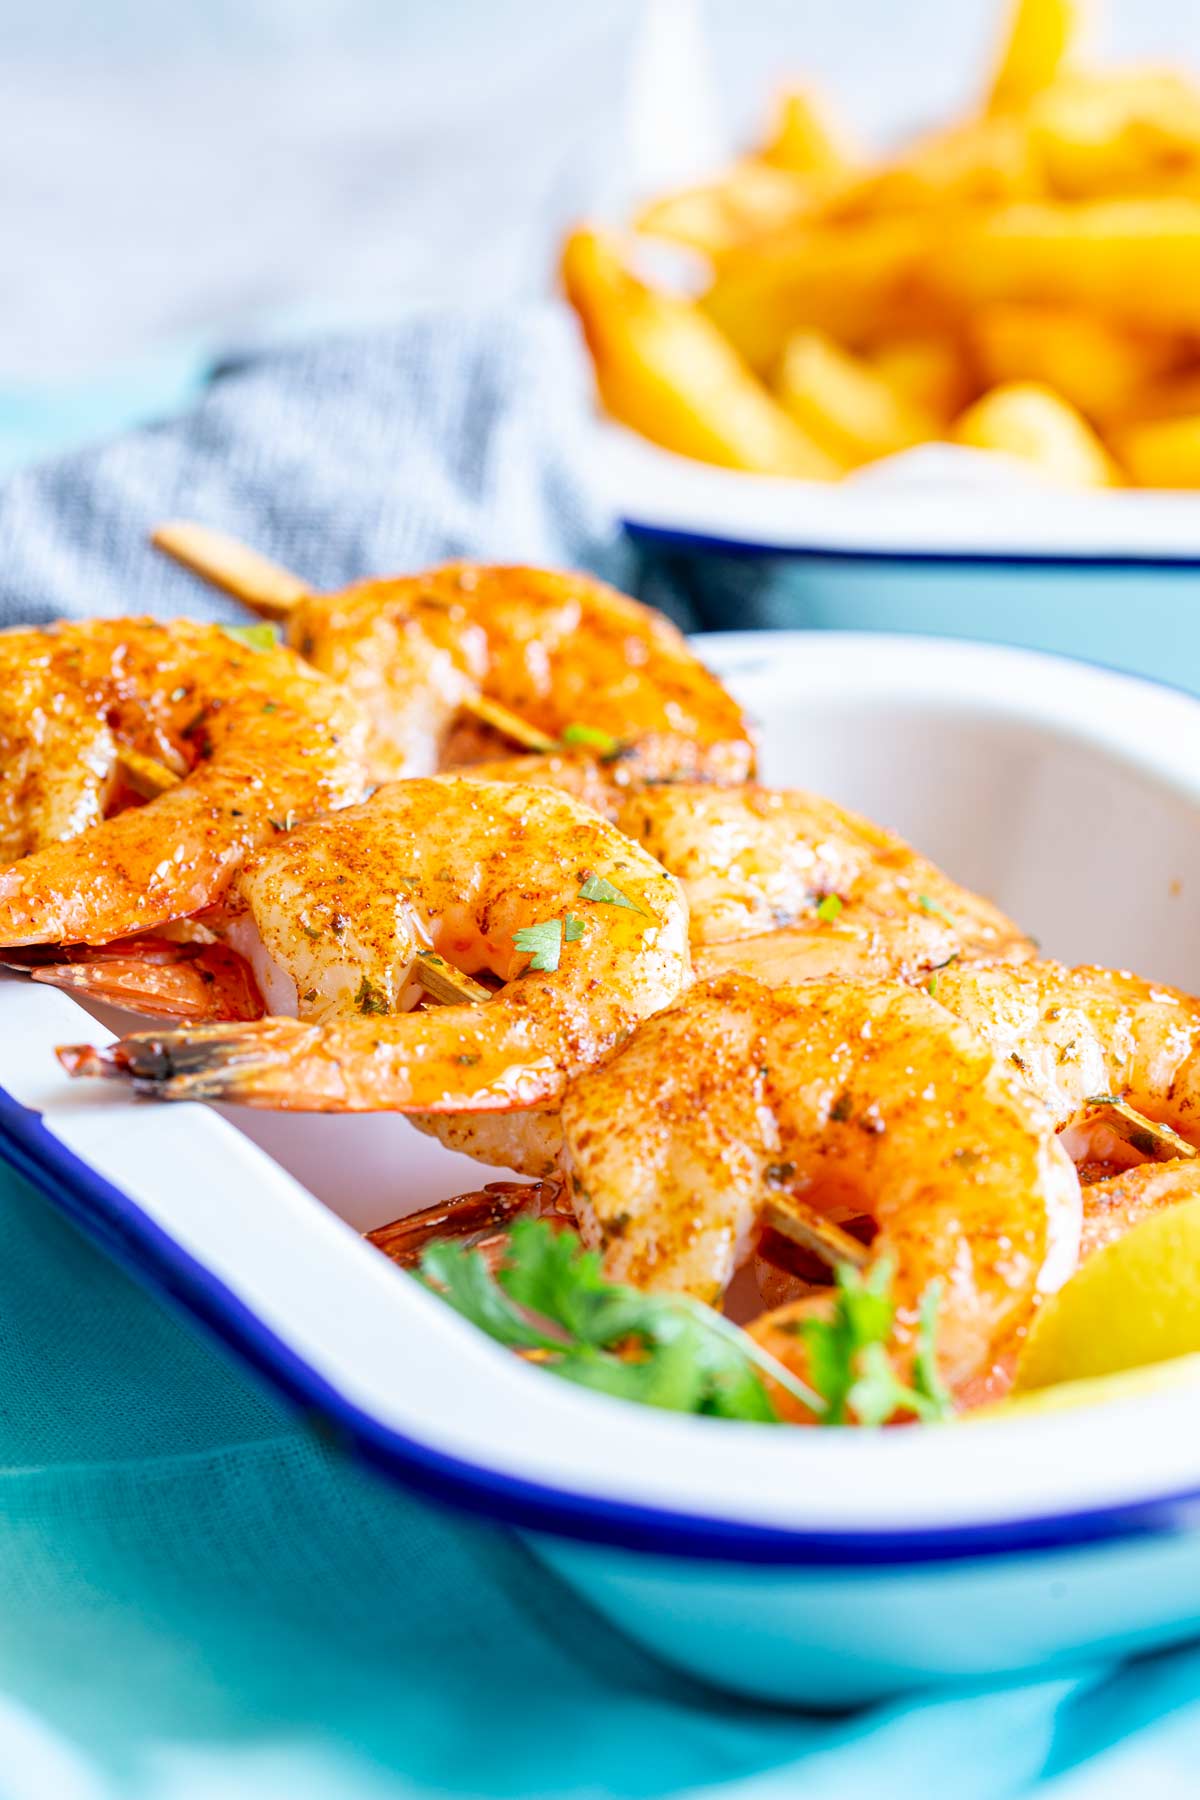 a dish of shrimp skewers and a dish of fries on a table